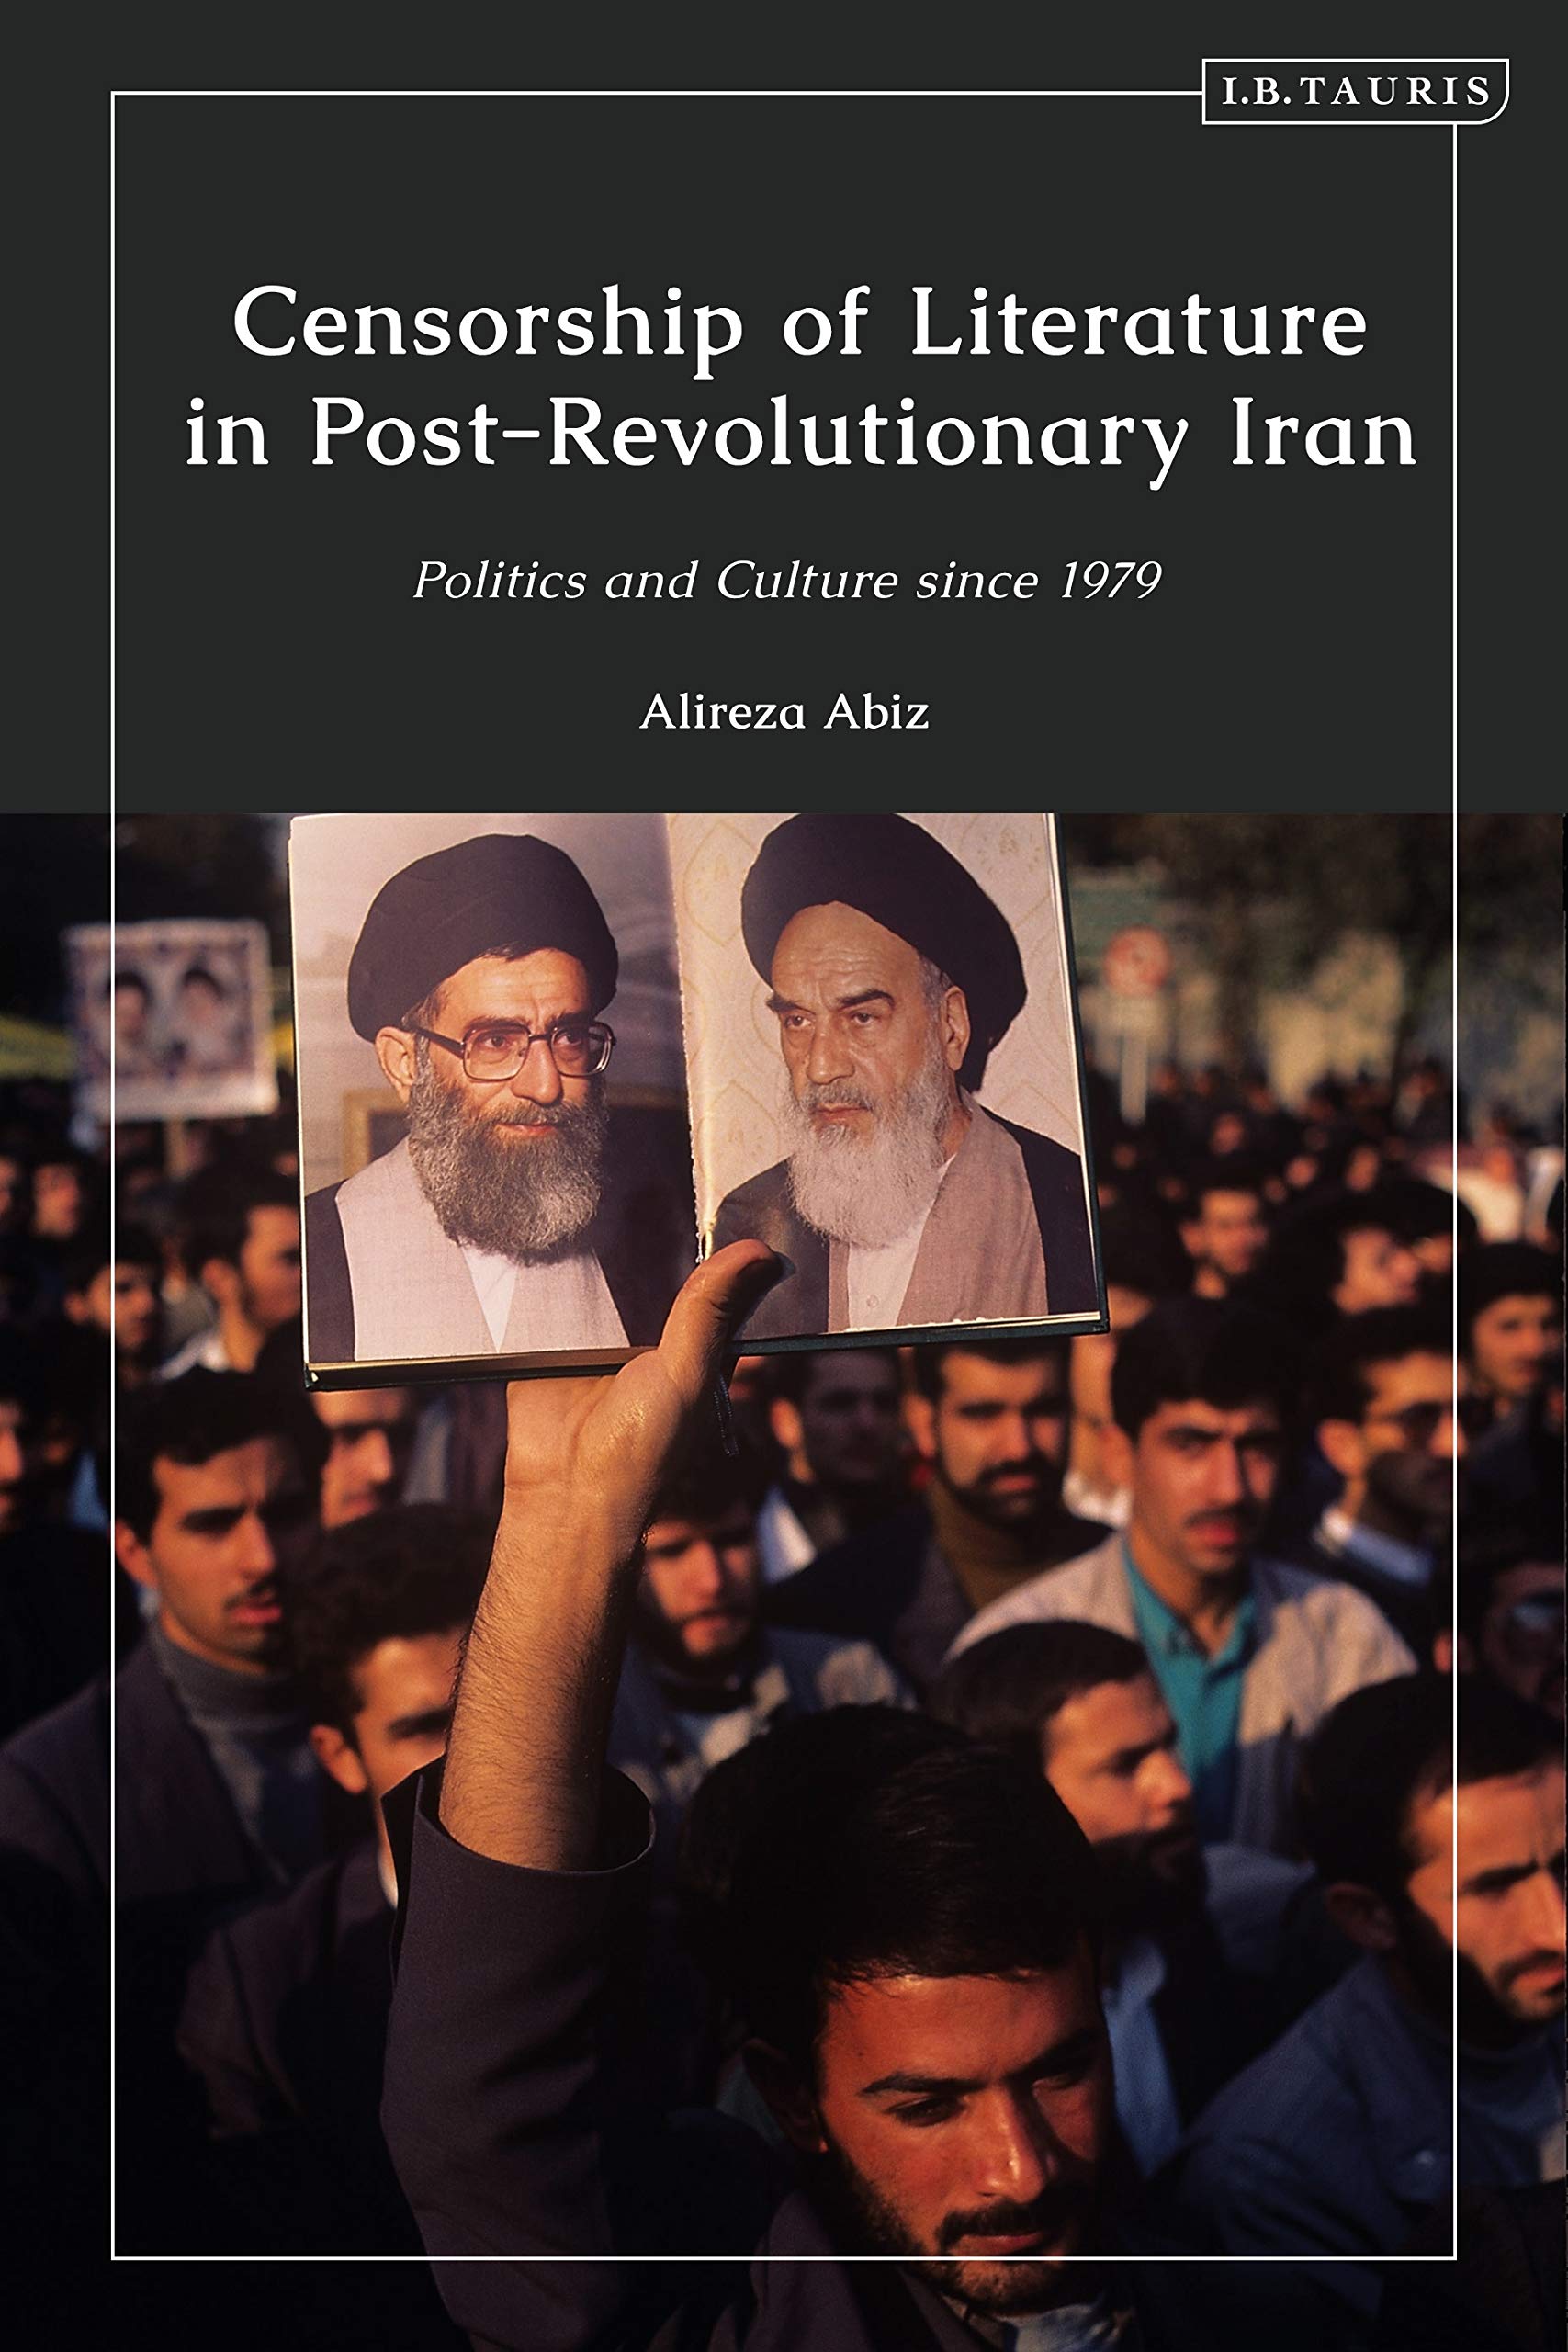 Cover of Alireza Abiz' "Censorship of Literature in Post-Revolutionary Iran" (published by I. B. Tauris)